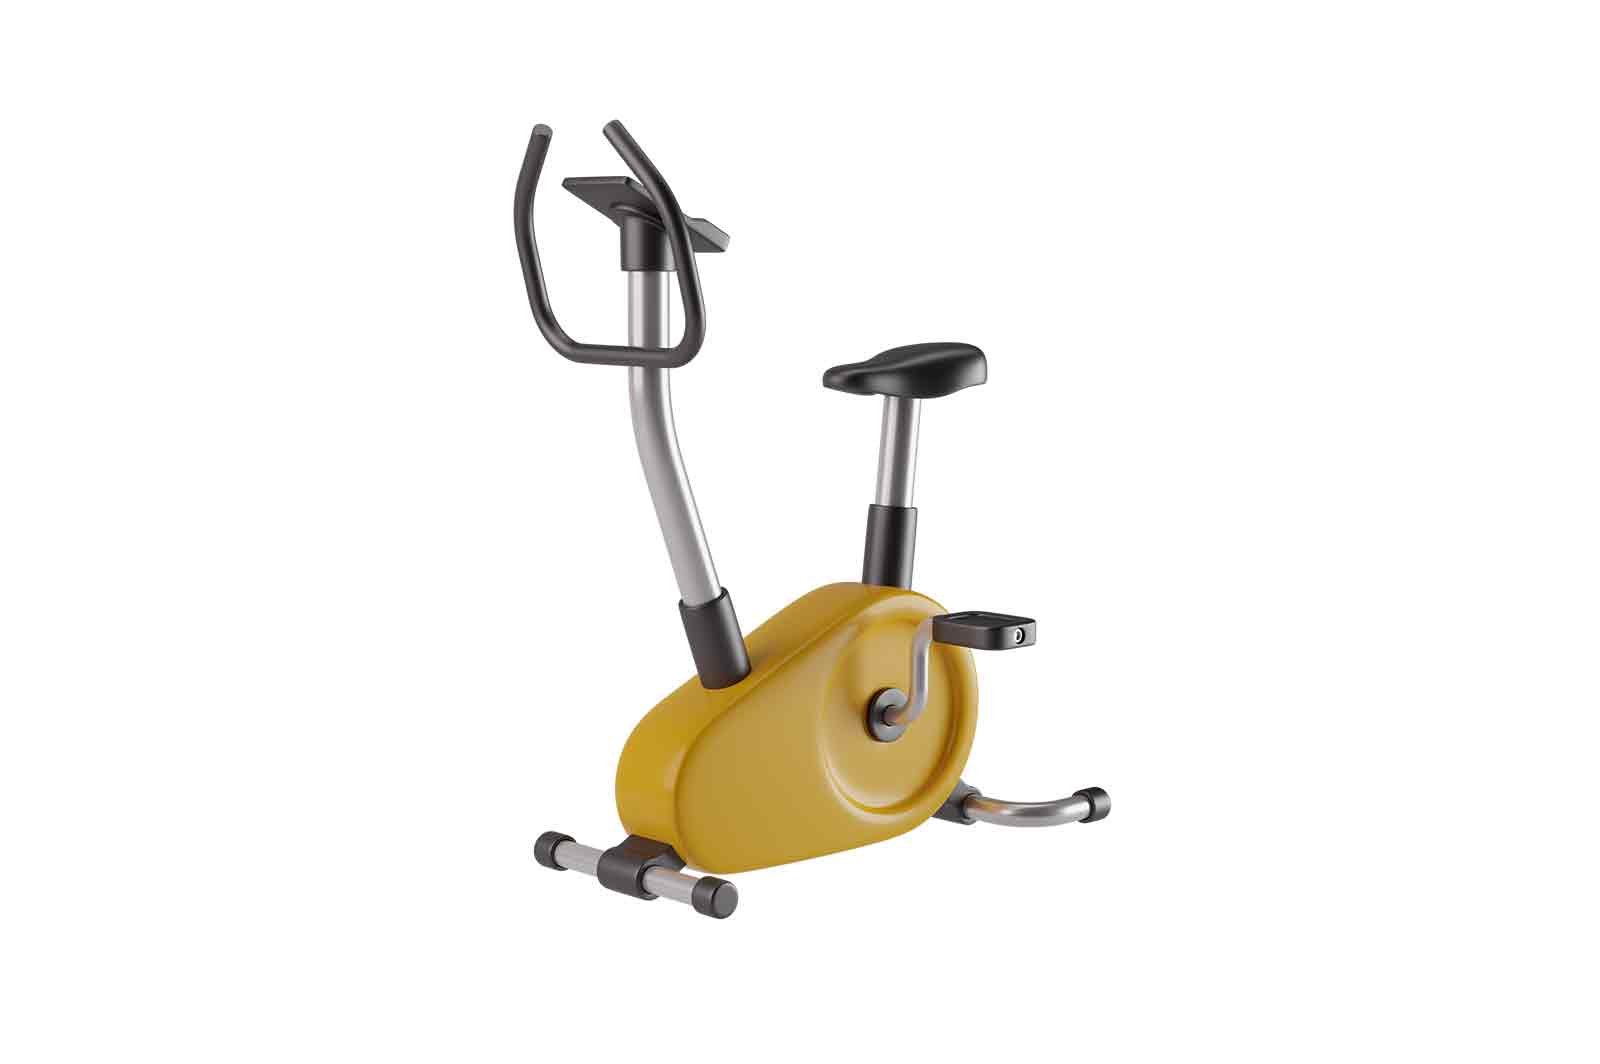 Stationary bicycle for workout 3d rendered illustration. Fitness cardio exercise equipment. Gym electric training machine, spinning bike